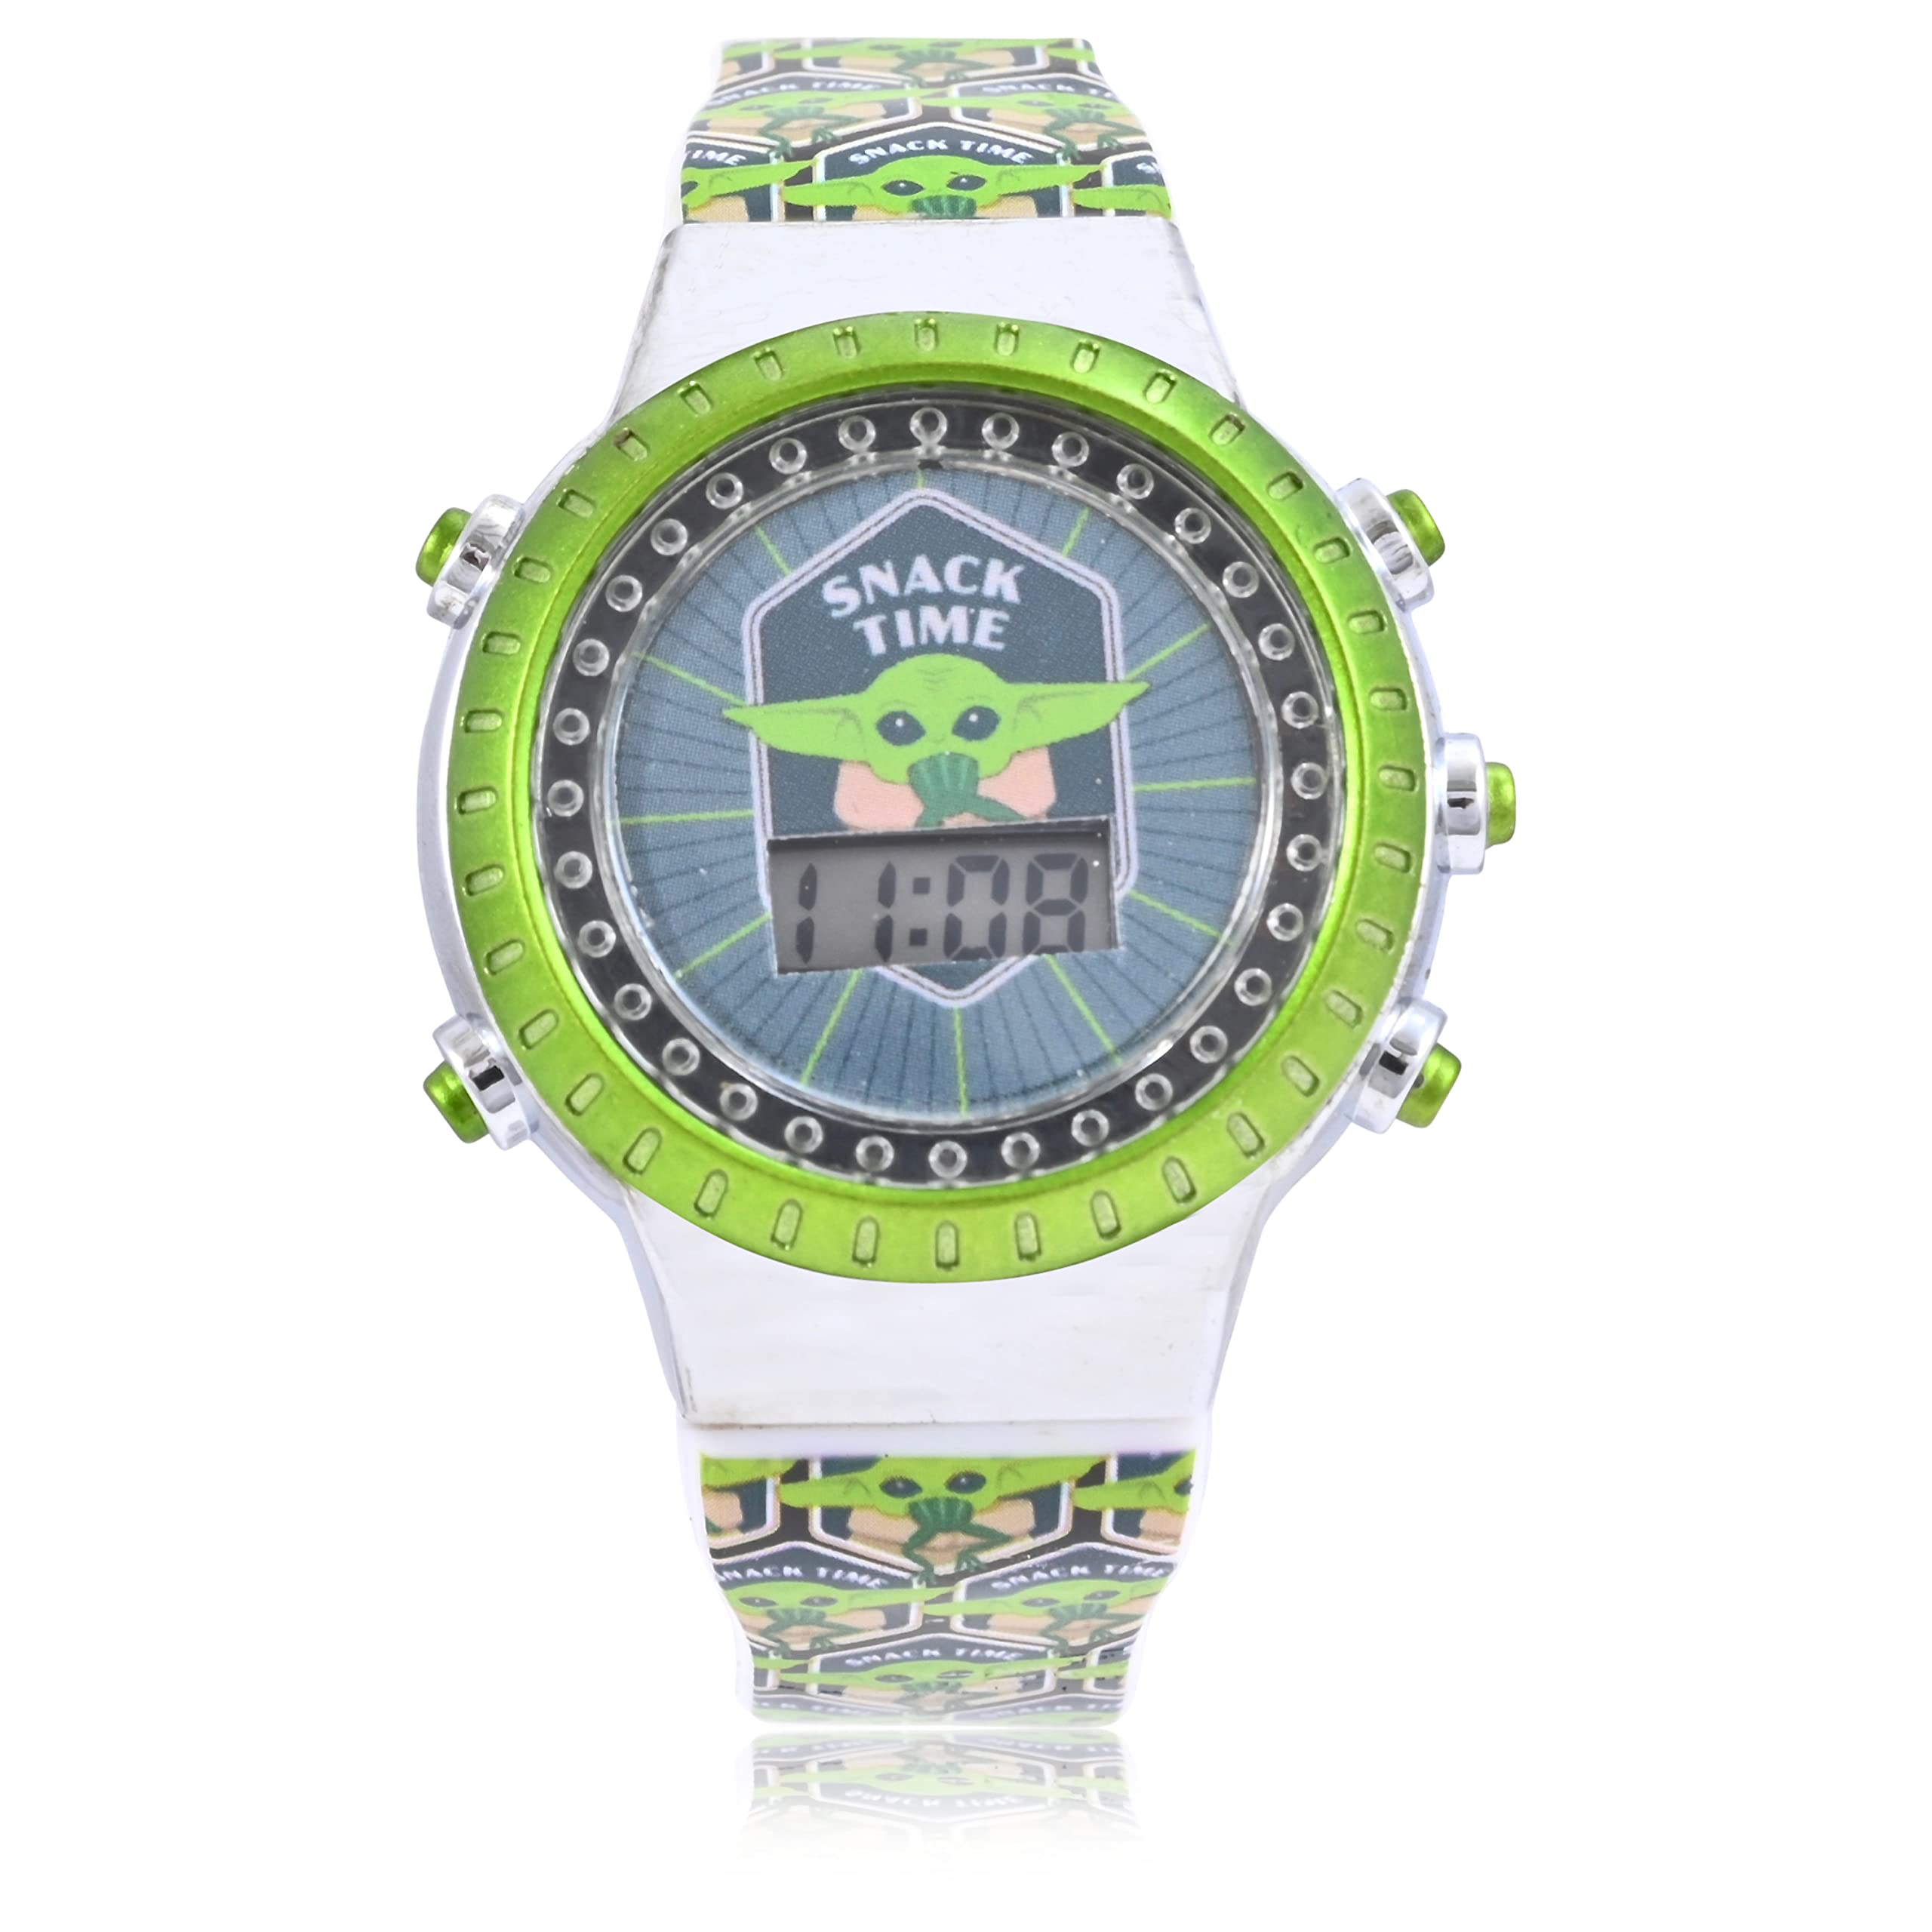 Accutime Lucasfilm Star Wars Mandalorian Digital Kids Watch - LED Flaching Lights, LCD Display, Toddlers, Girls Or Boys, Silicone Strap in Green (Model: MNL4013AZ)